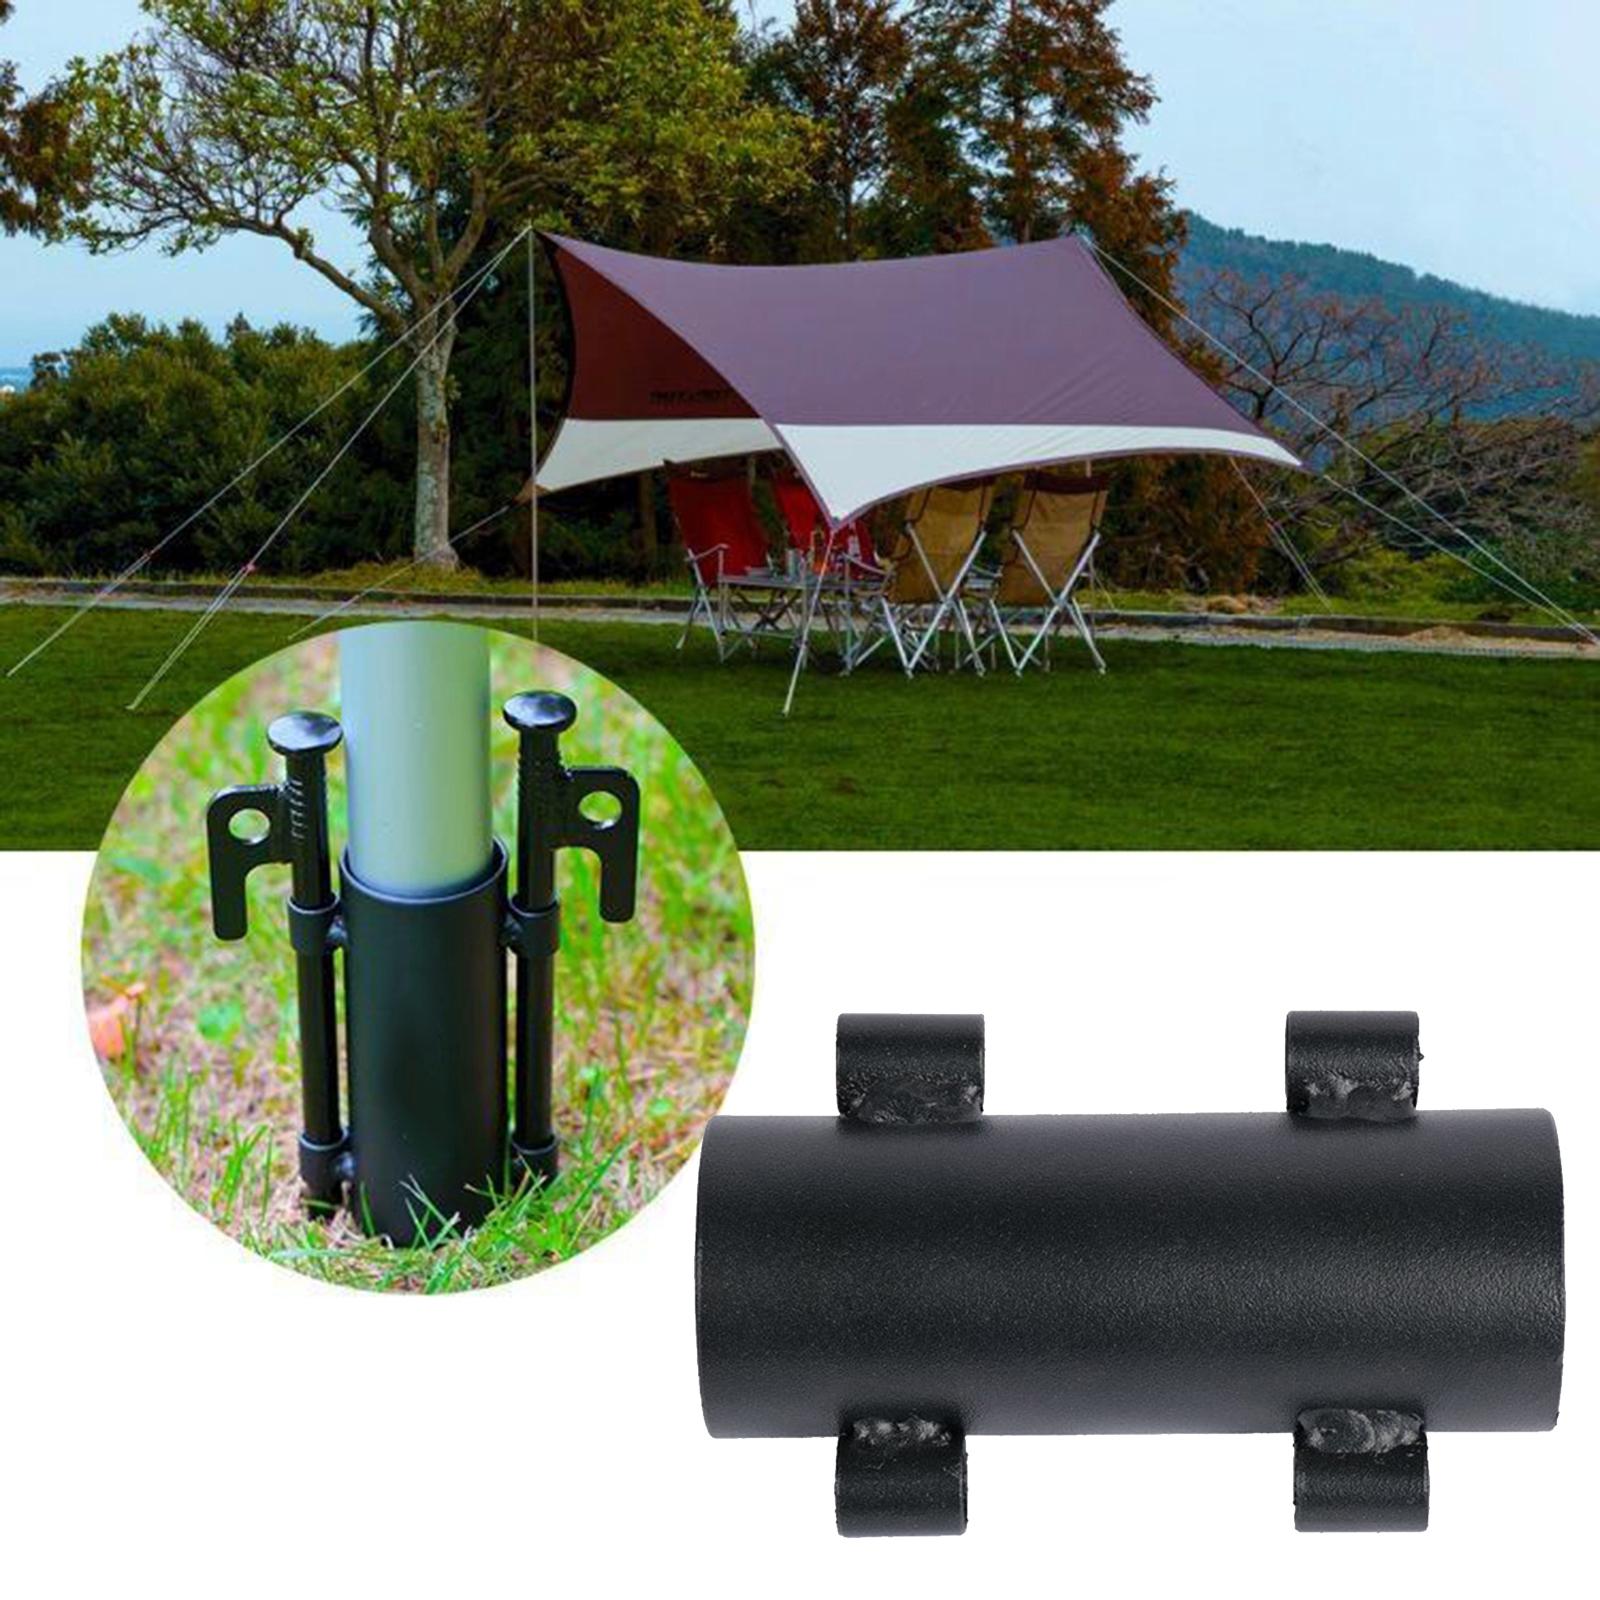 Metal Sunshade Pole Ground Holder Frame Tent Awning Canopy Pole Fixing Pipe Outdoor Camping Fishing Camp Column Nail Holder Accessory